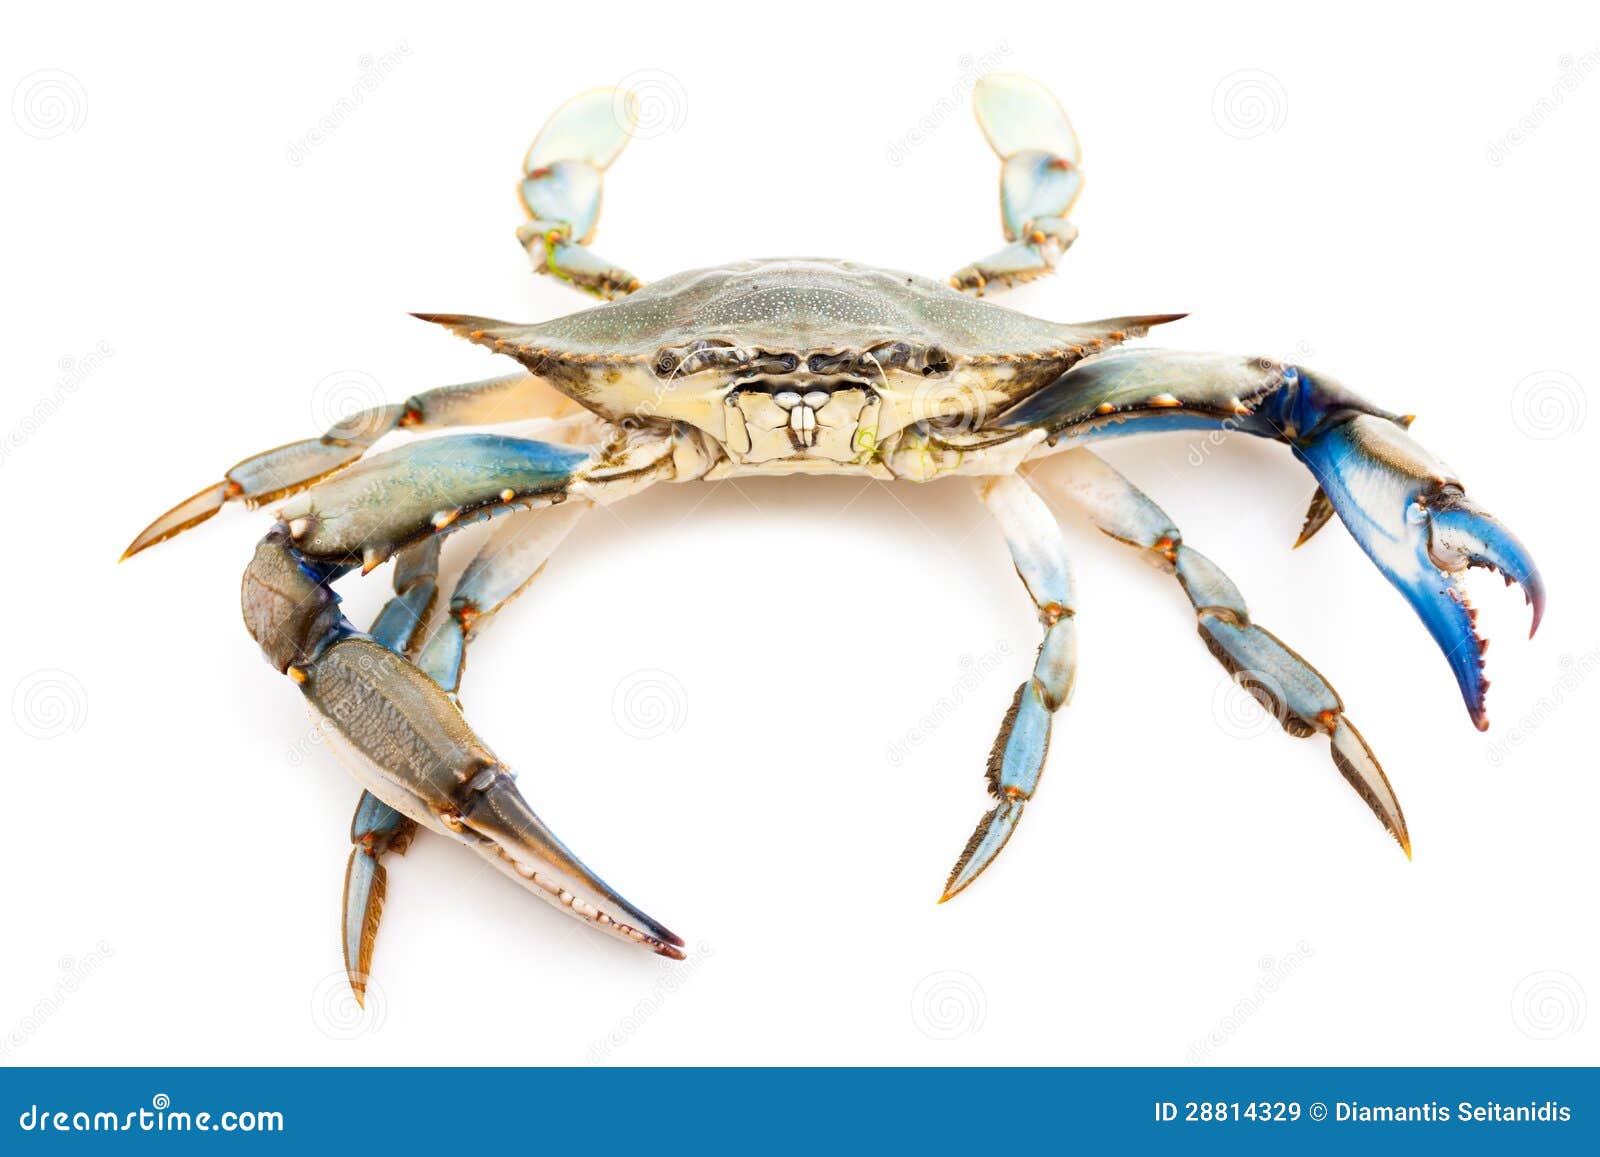 Blue Crab Royalty Free Stock Images - Image: 28814329